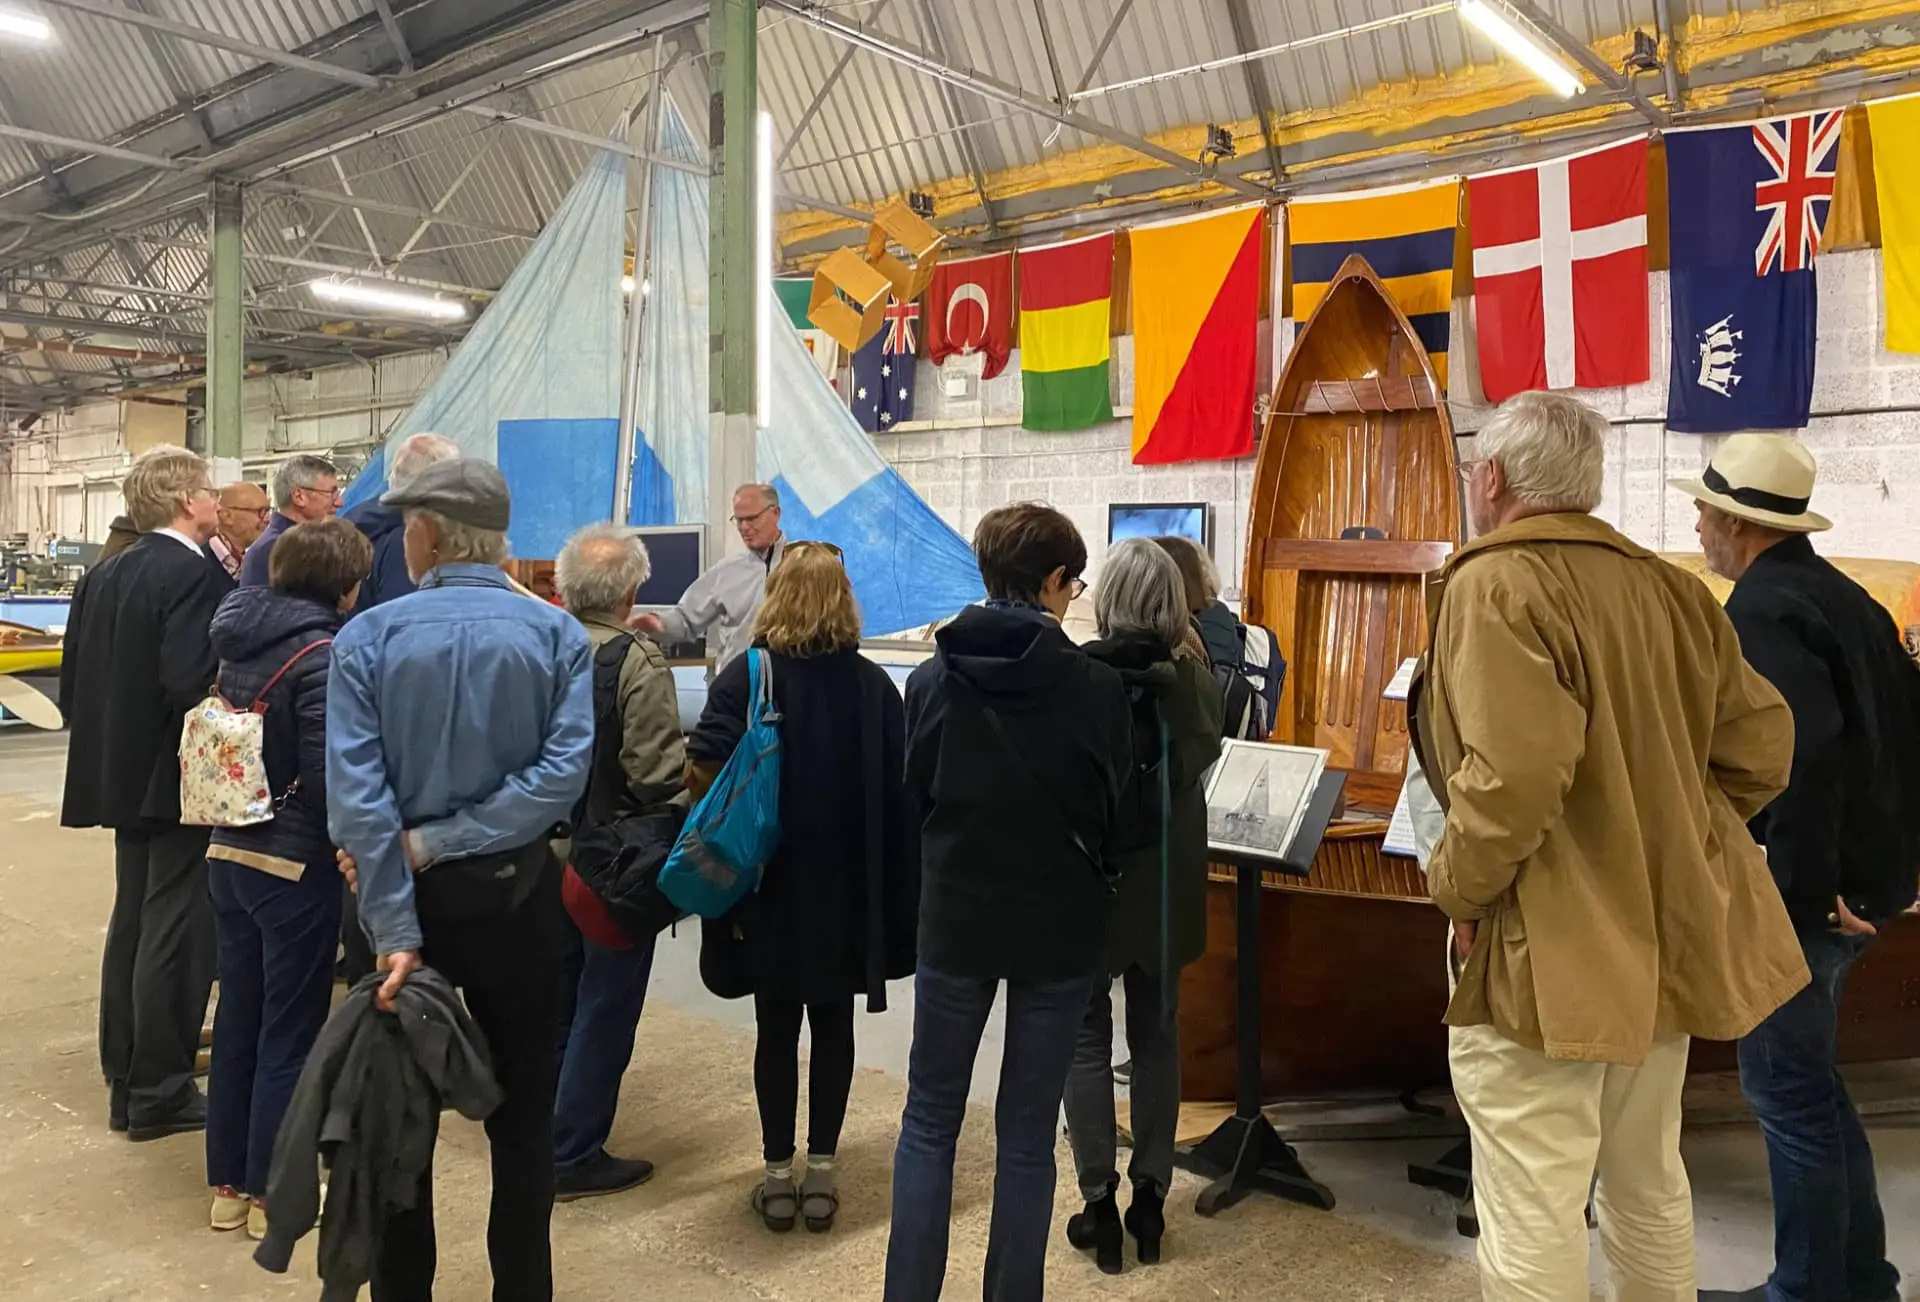 People on a tour of the classic boat museum